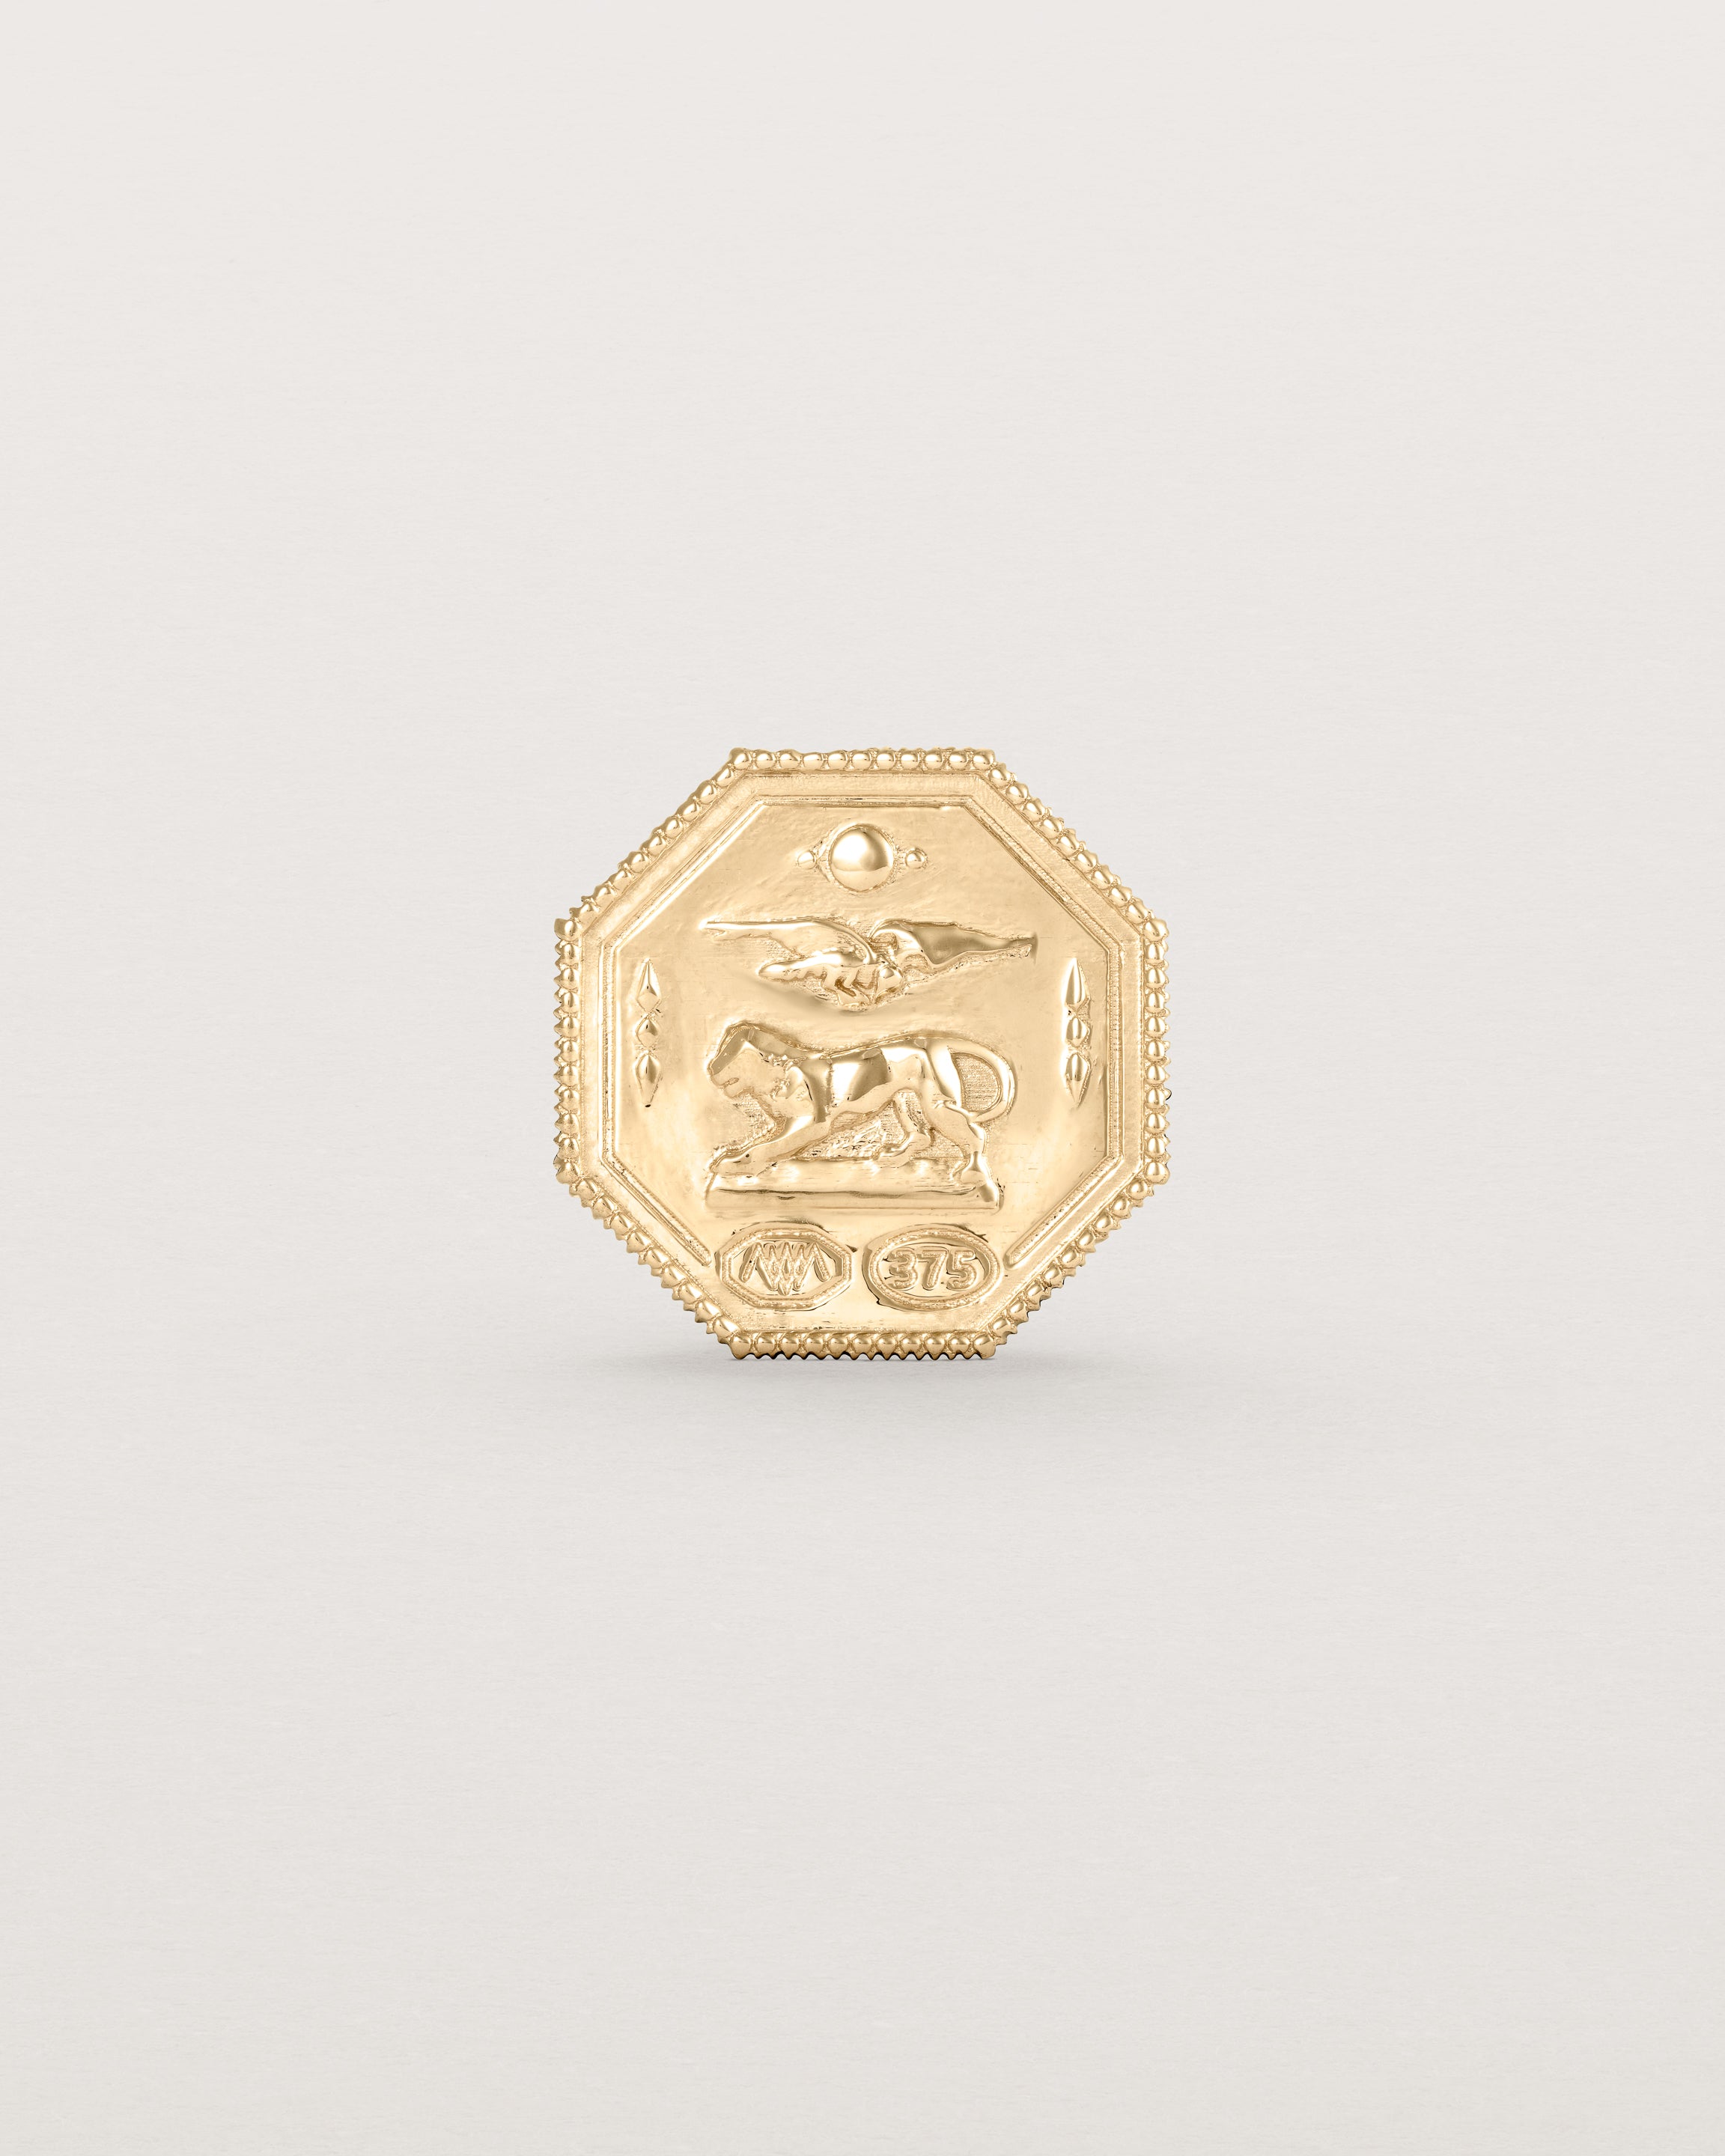 yellow gold six pence coin engraved with a crest and initials